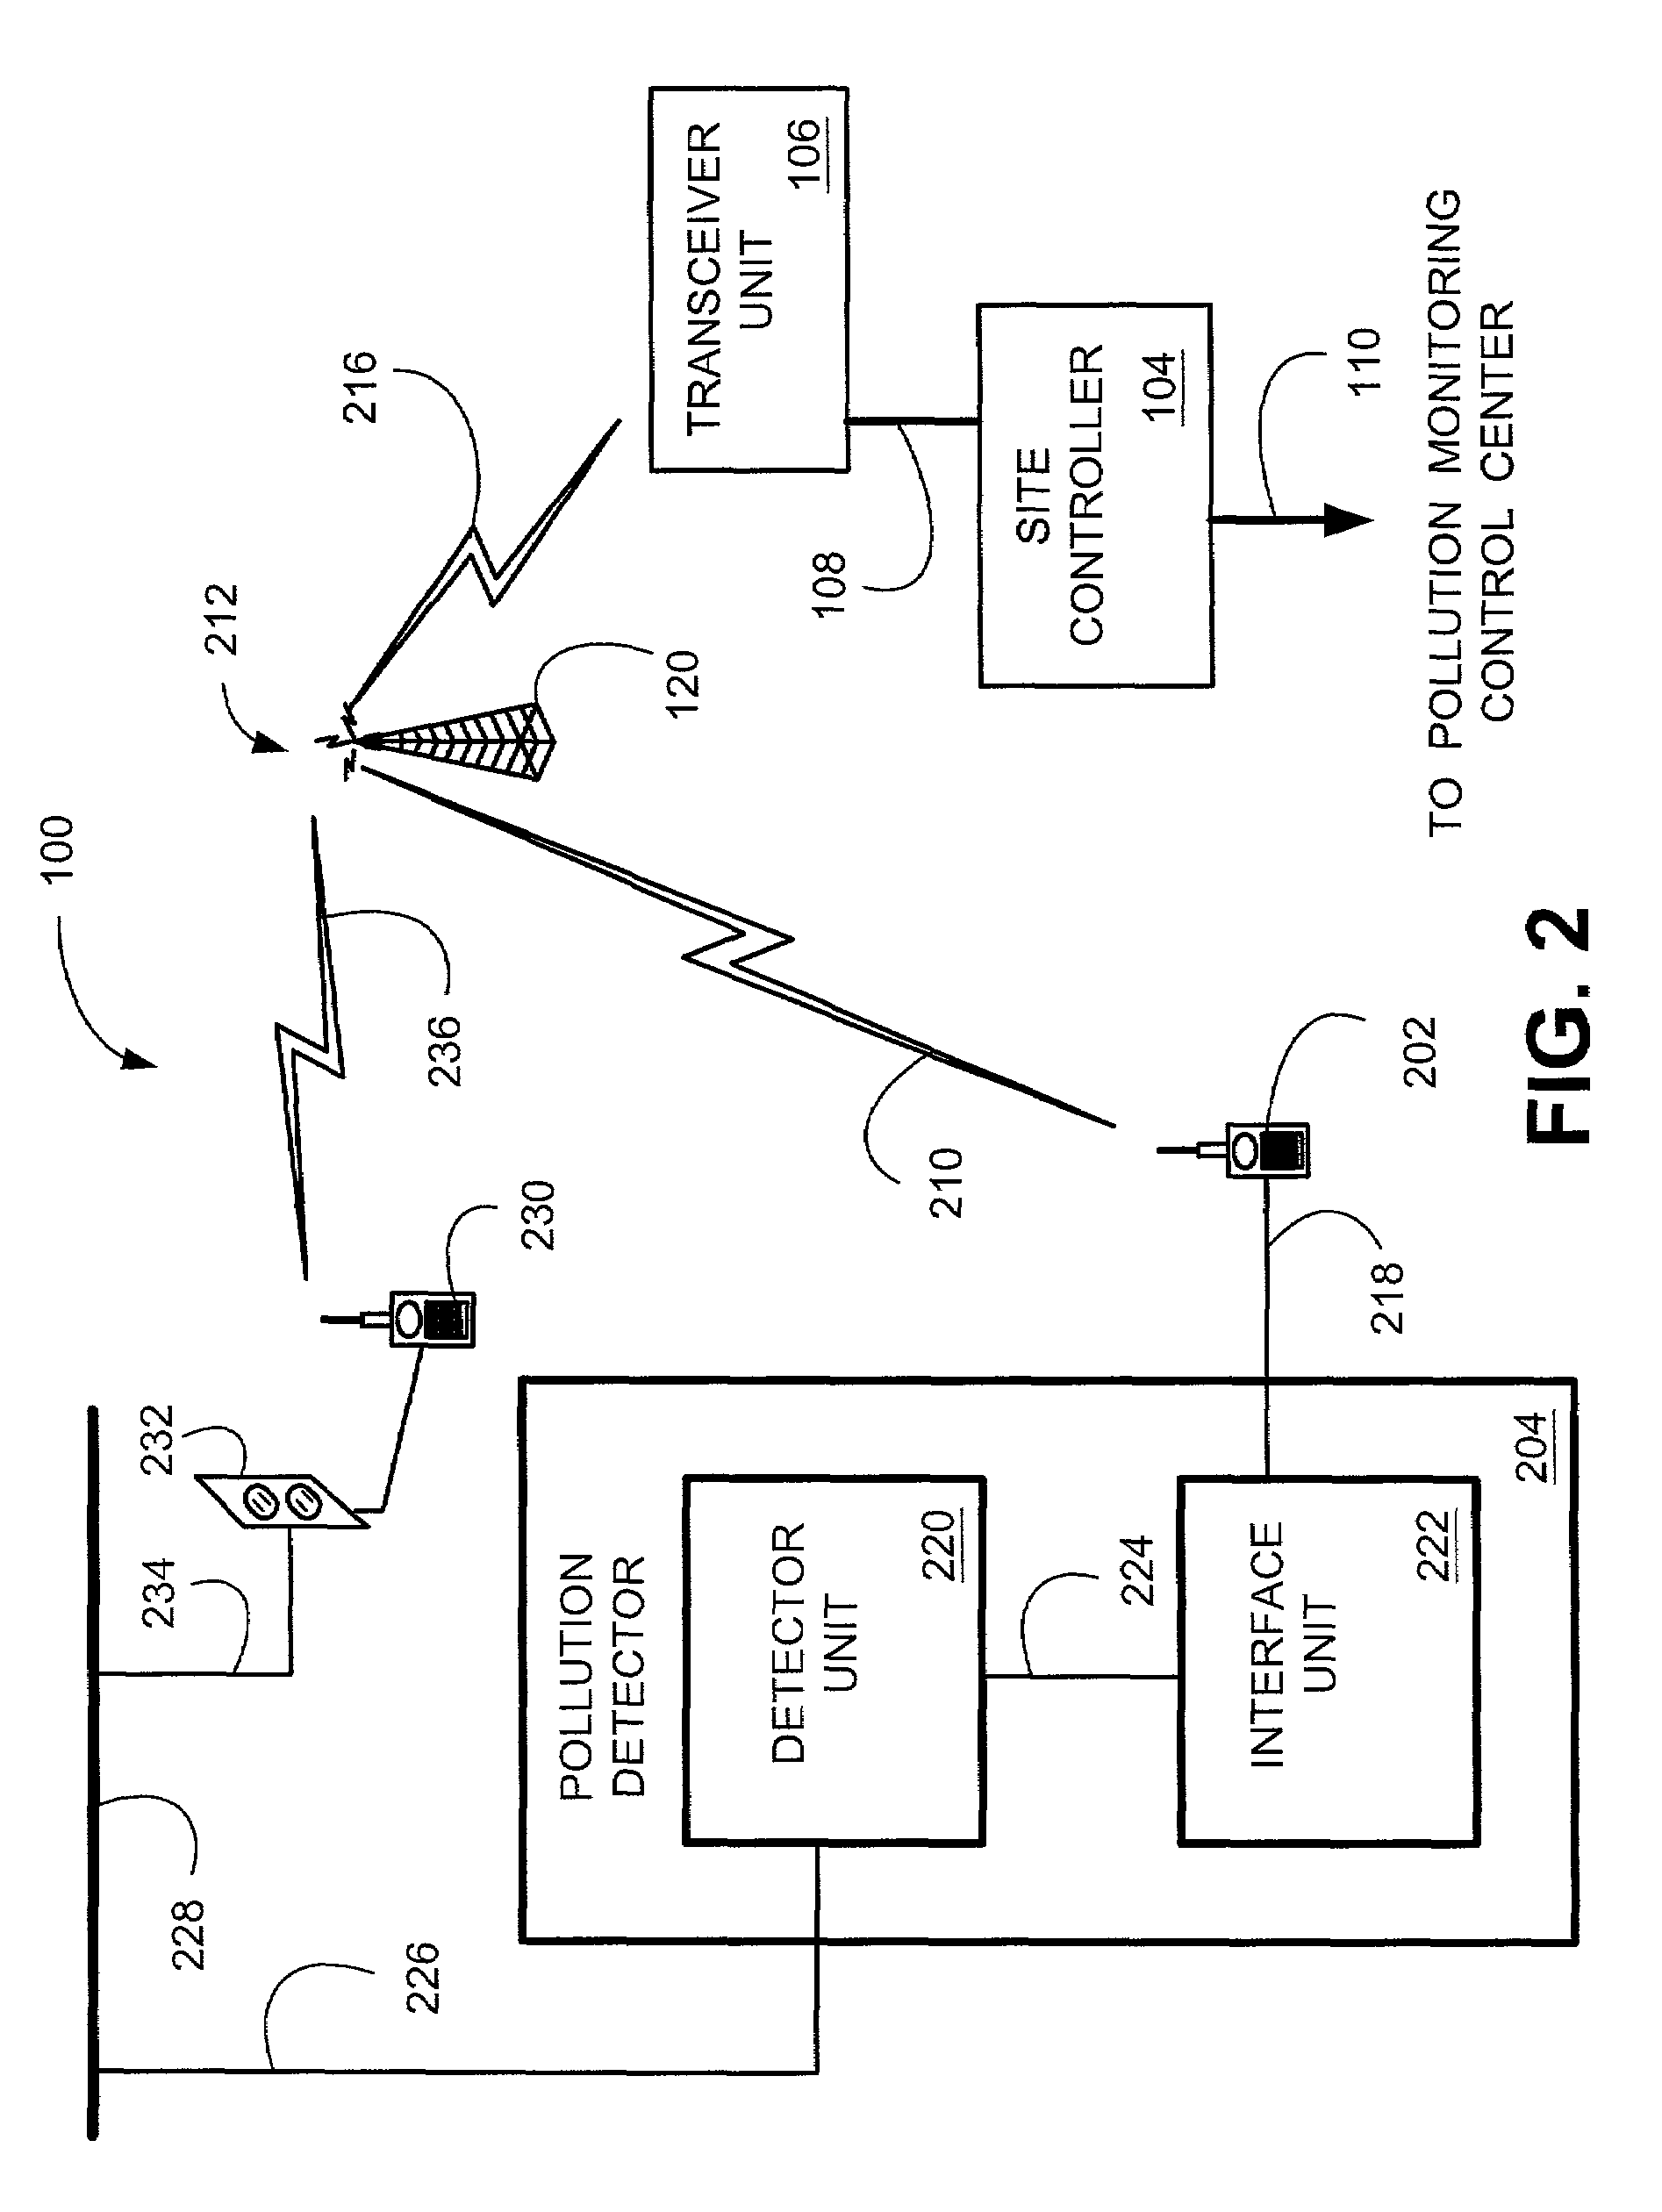 System and method for transmitting pollution information over an integrated wireless network